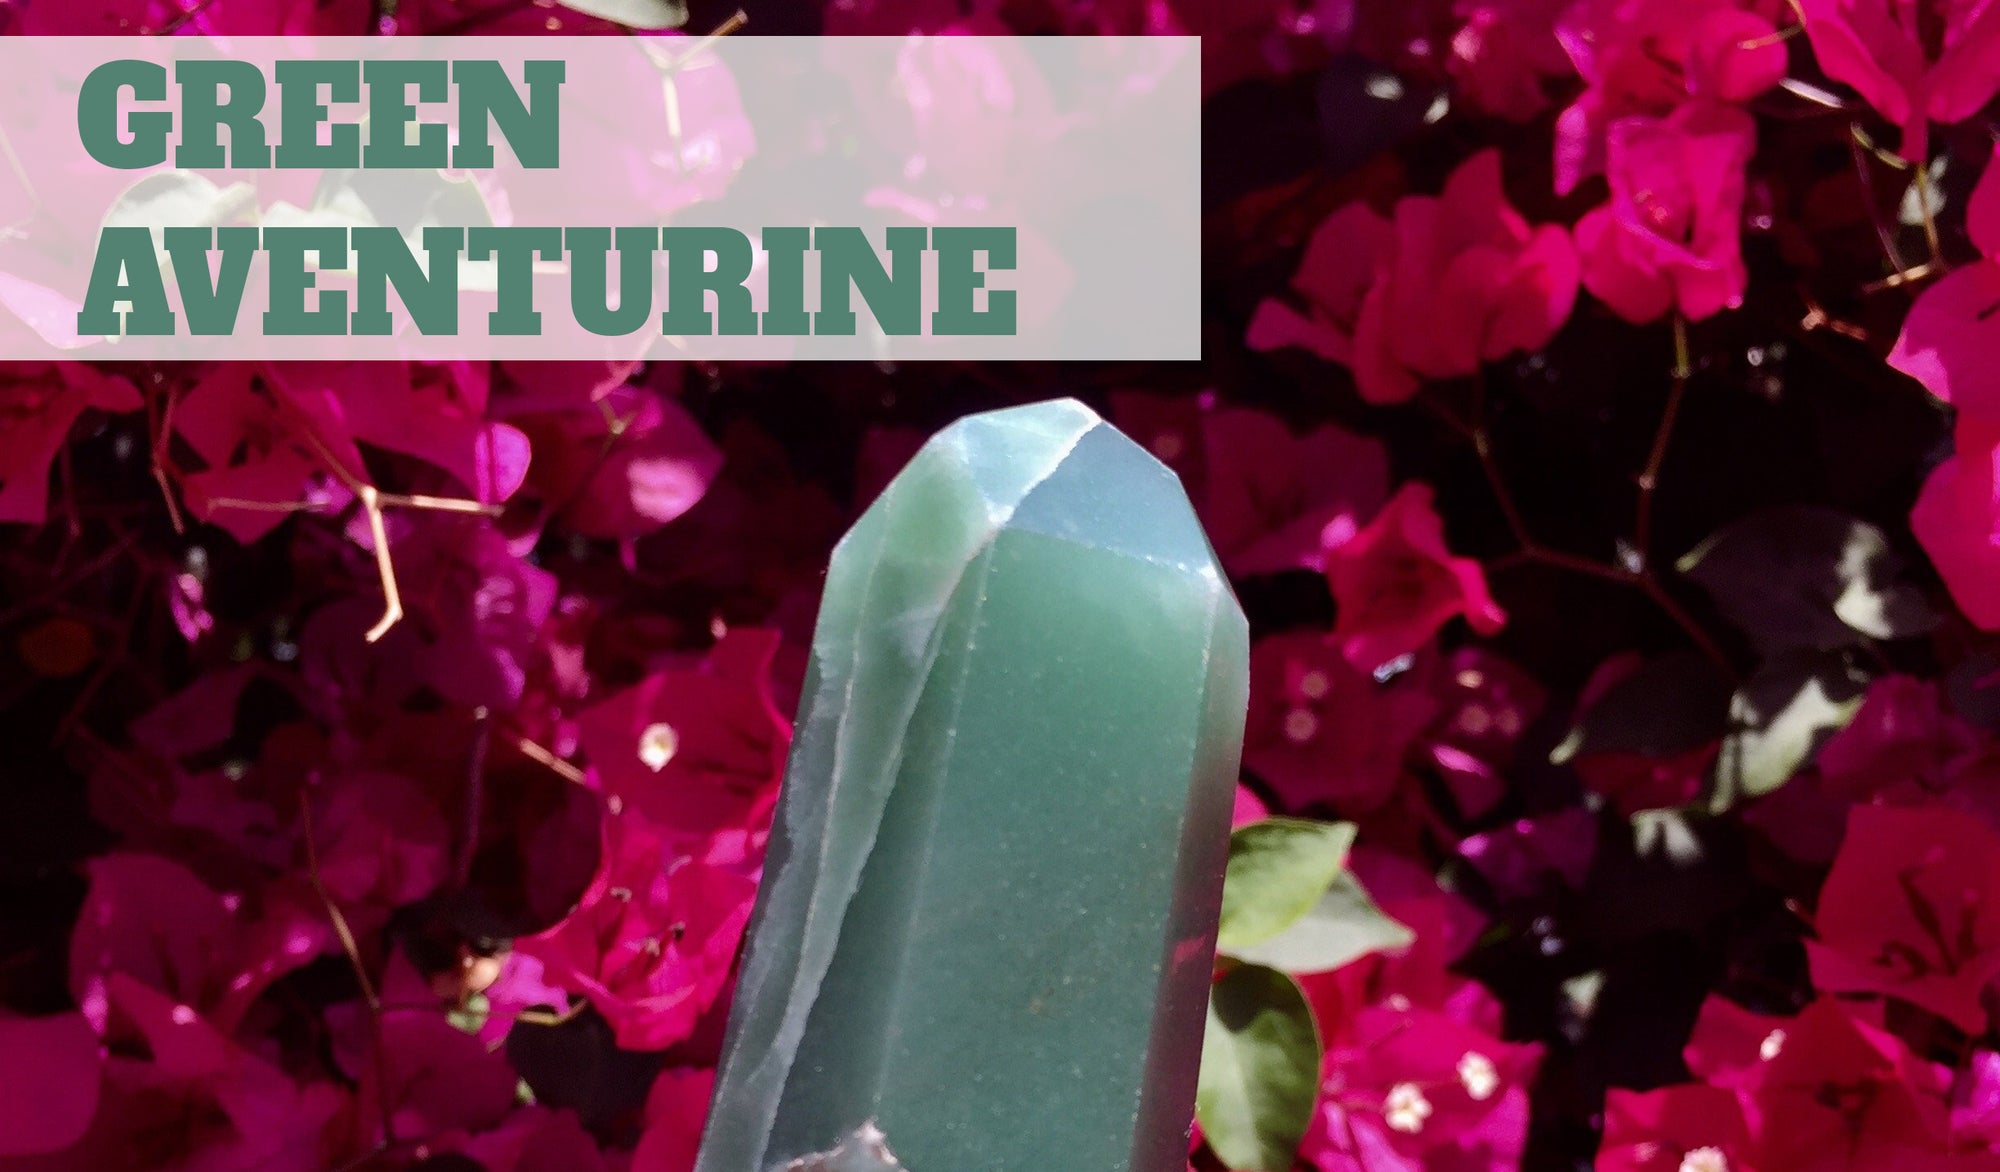 Learn More about Green Aventurine